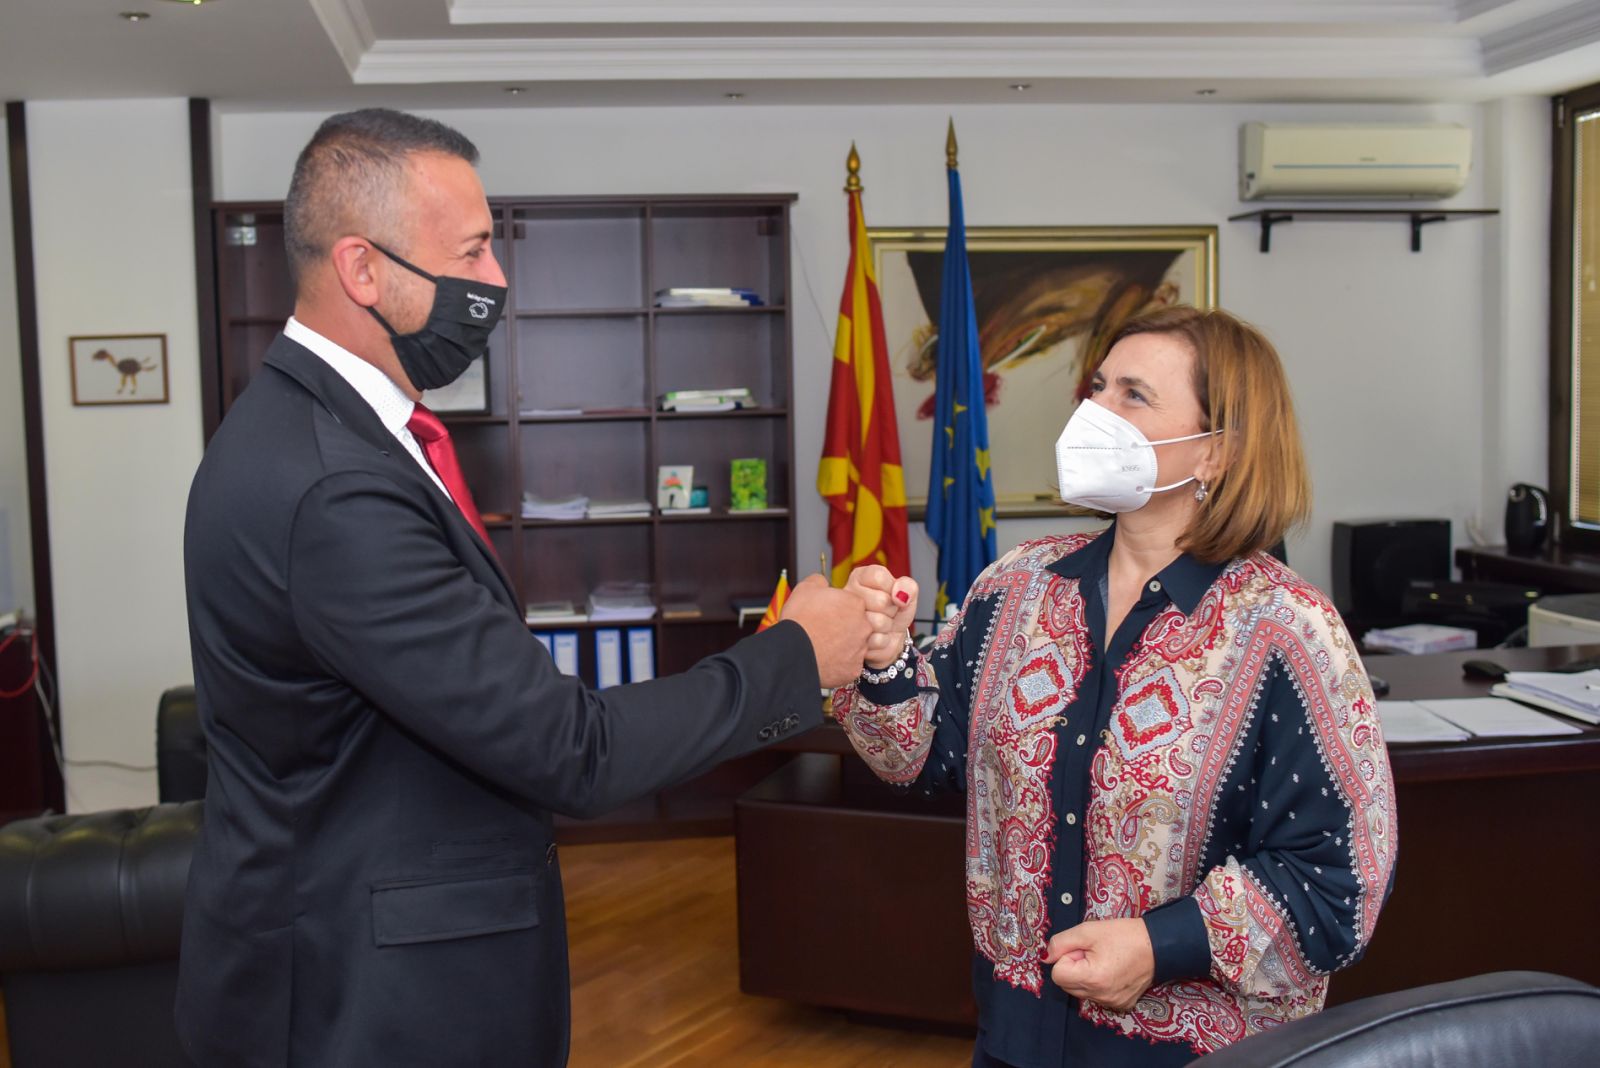 Mr Usein and Ms Shahpaska;
Photo credit: Ministry of Labour and Social Policy, the Republic of North Macedonia